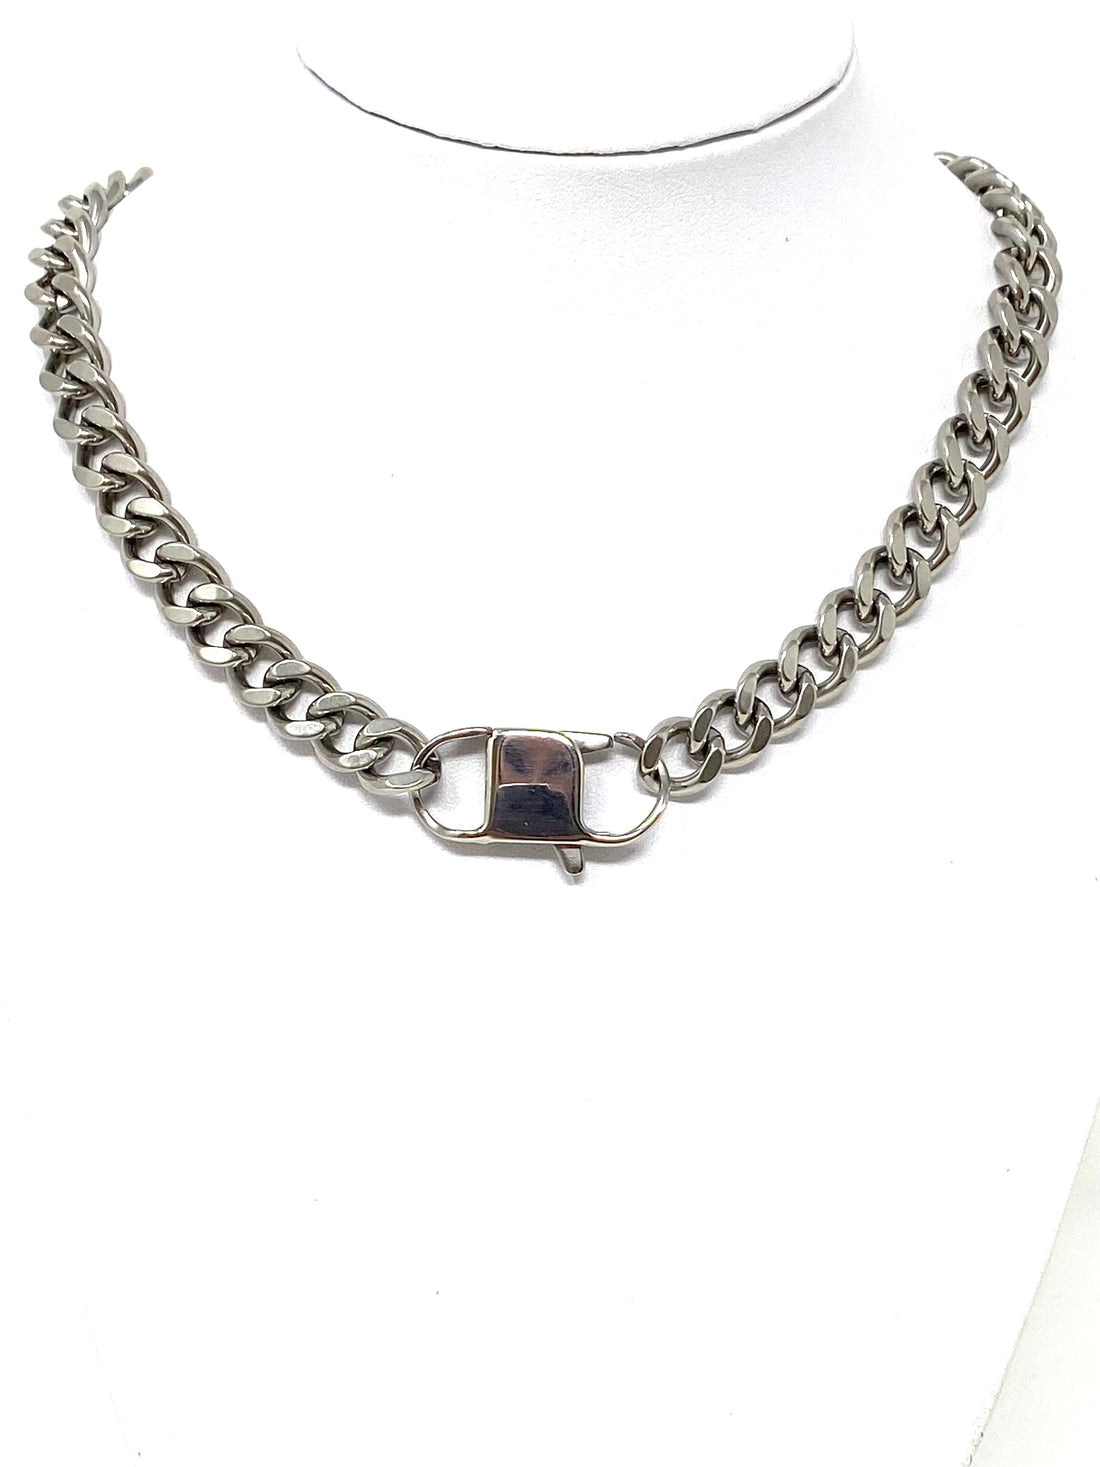 Winter Chain Necklace in Silver